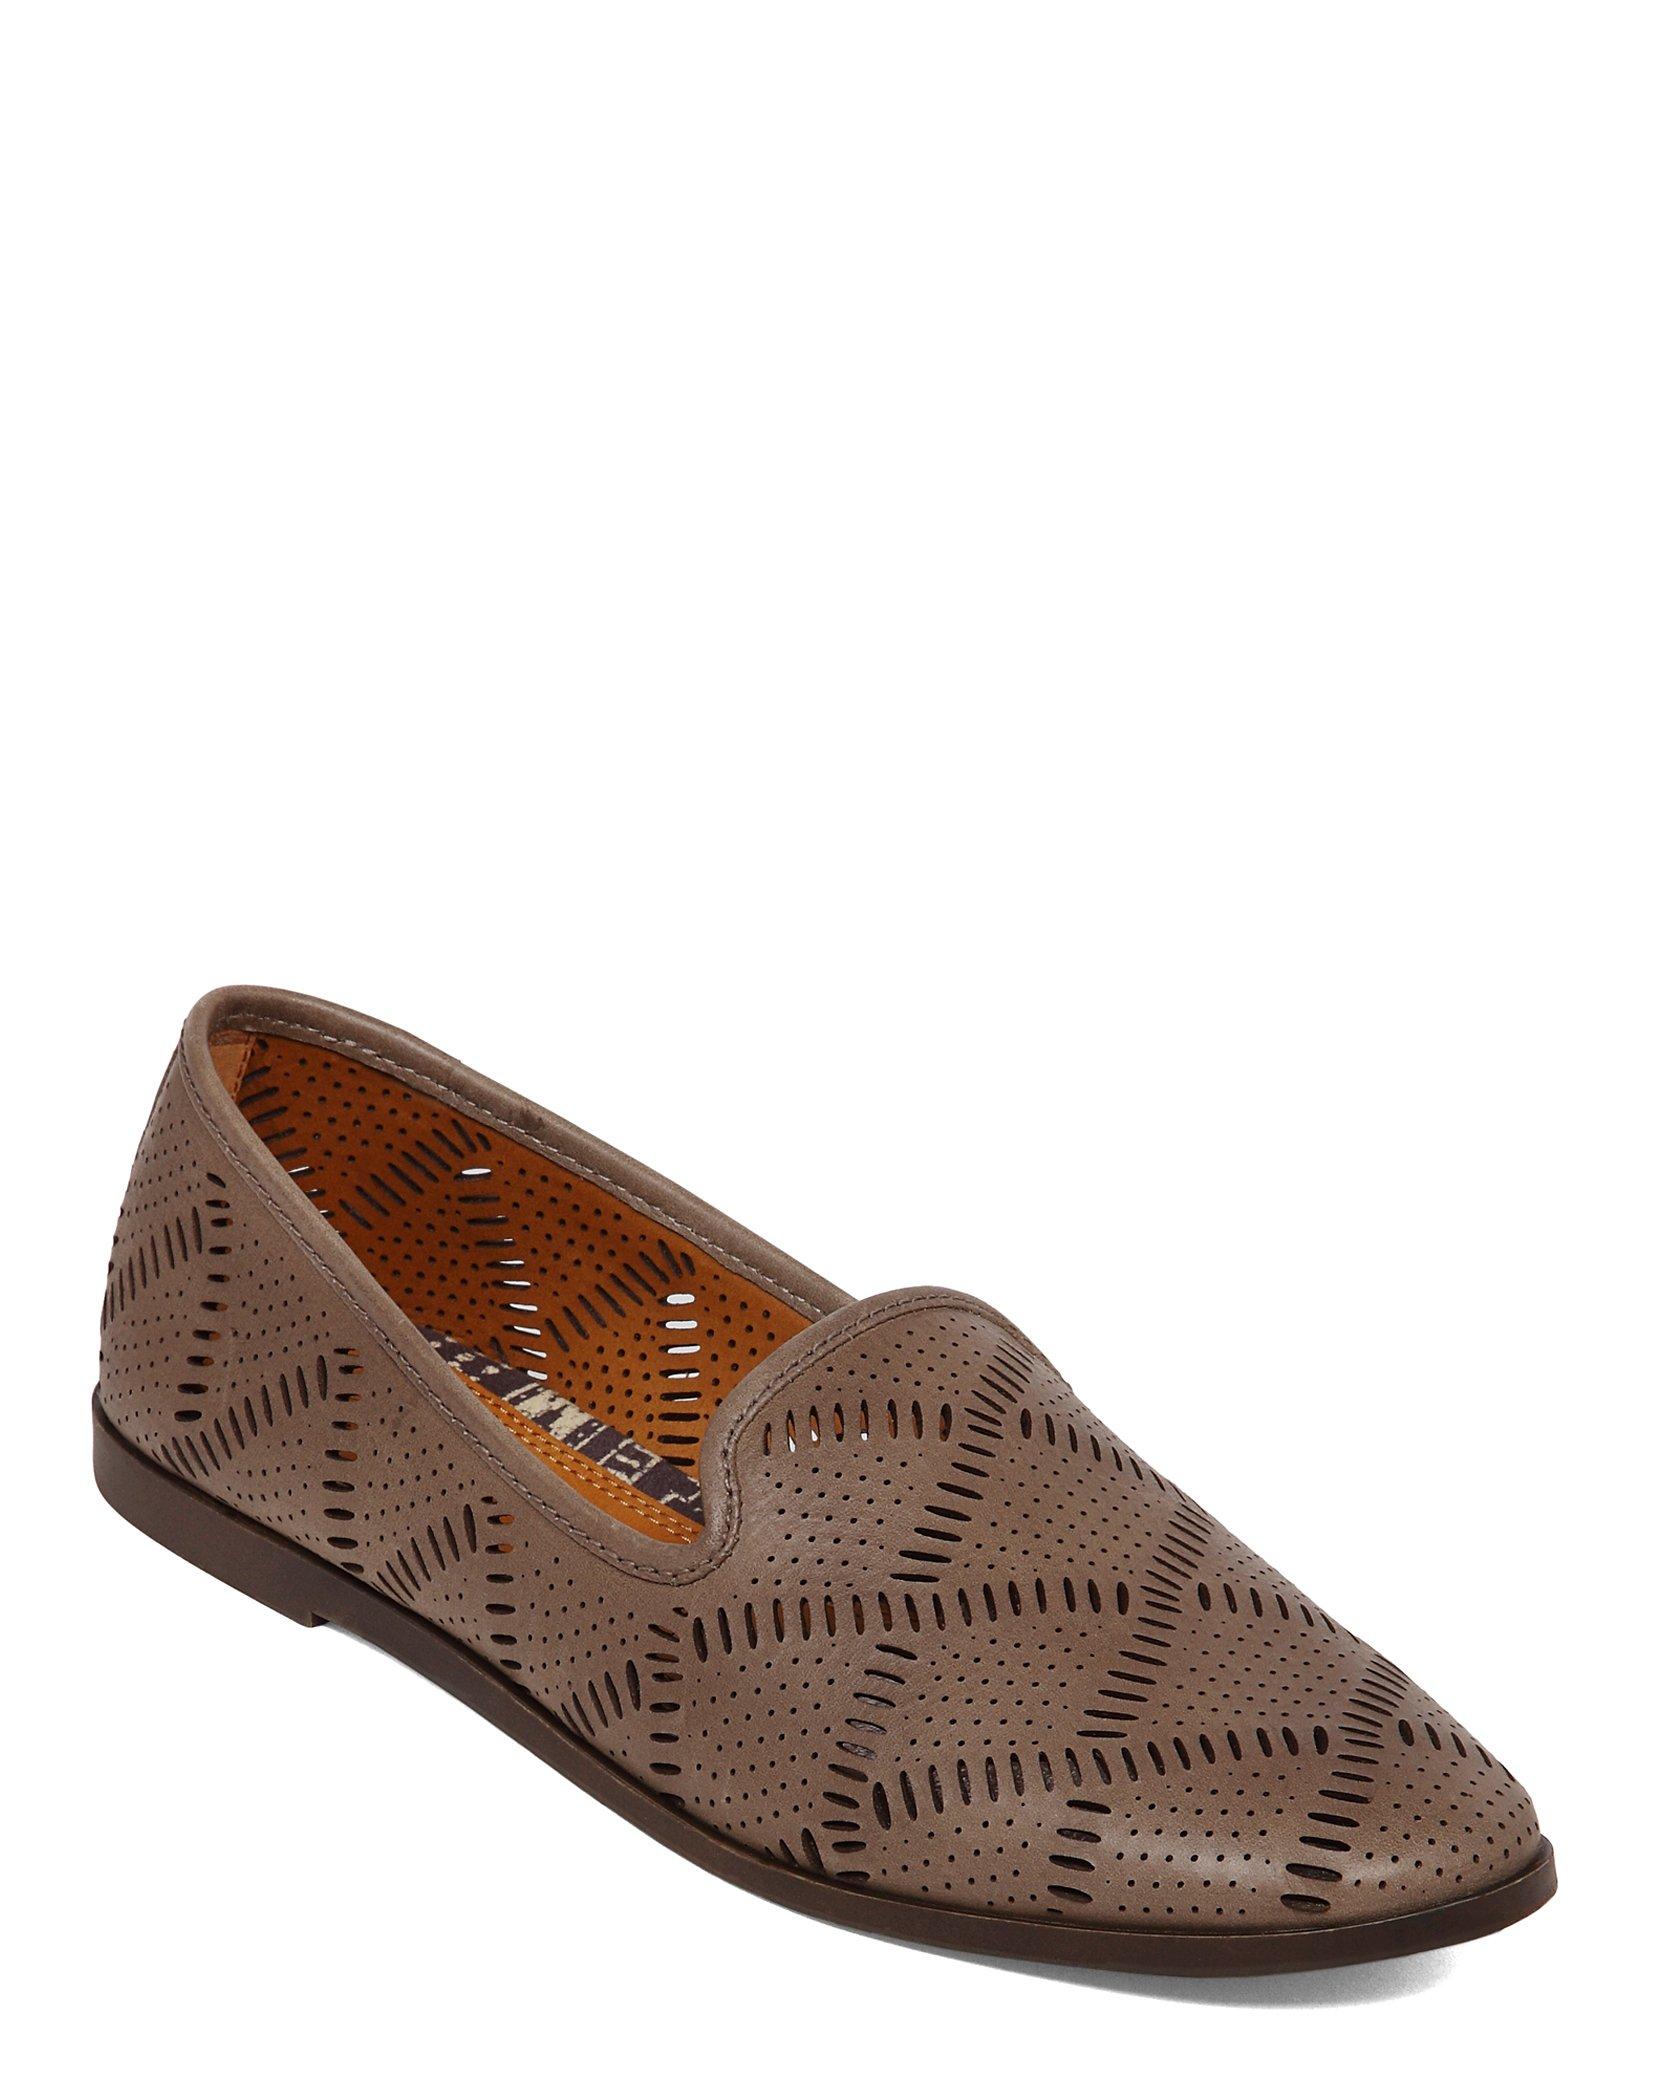 PARKERR PERFORATED LOAFER | Lucky Brand